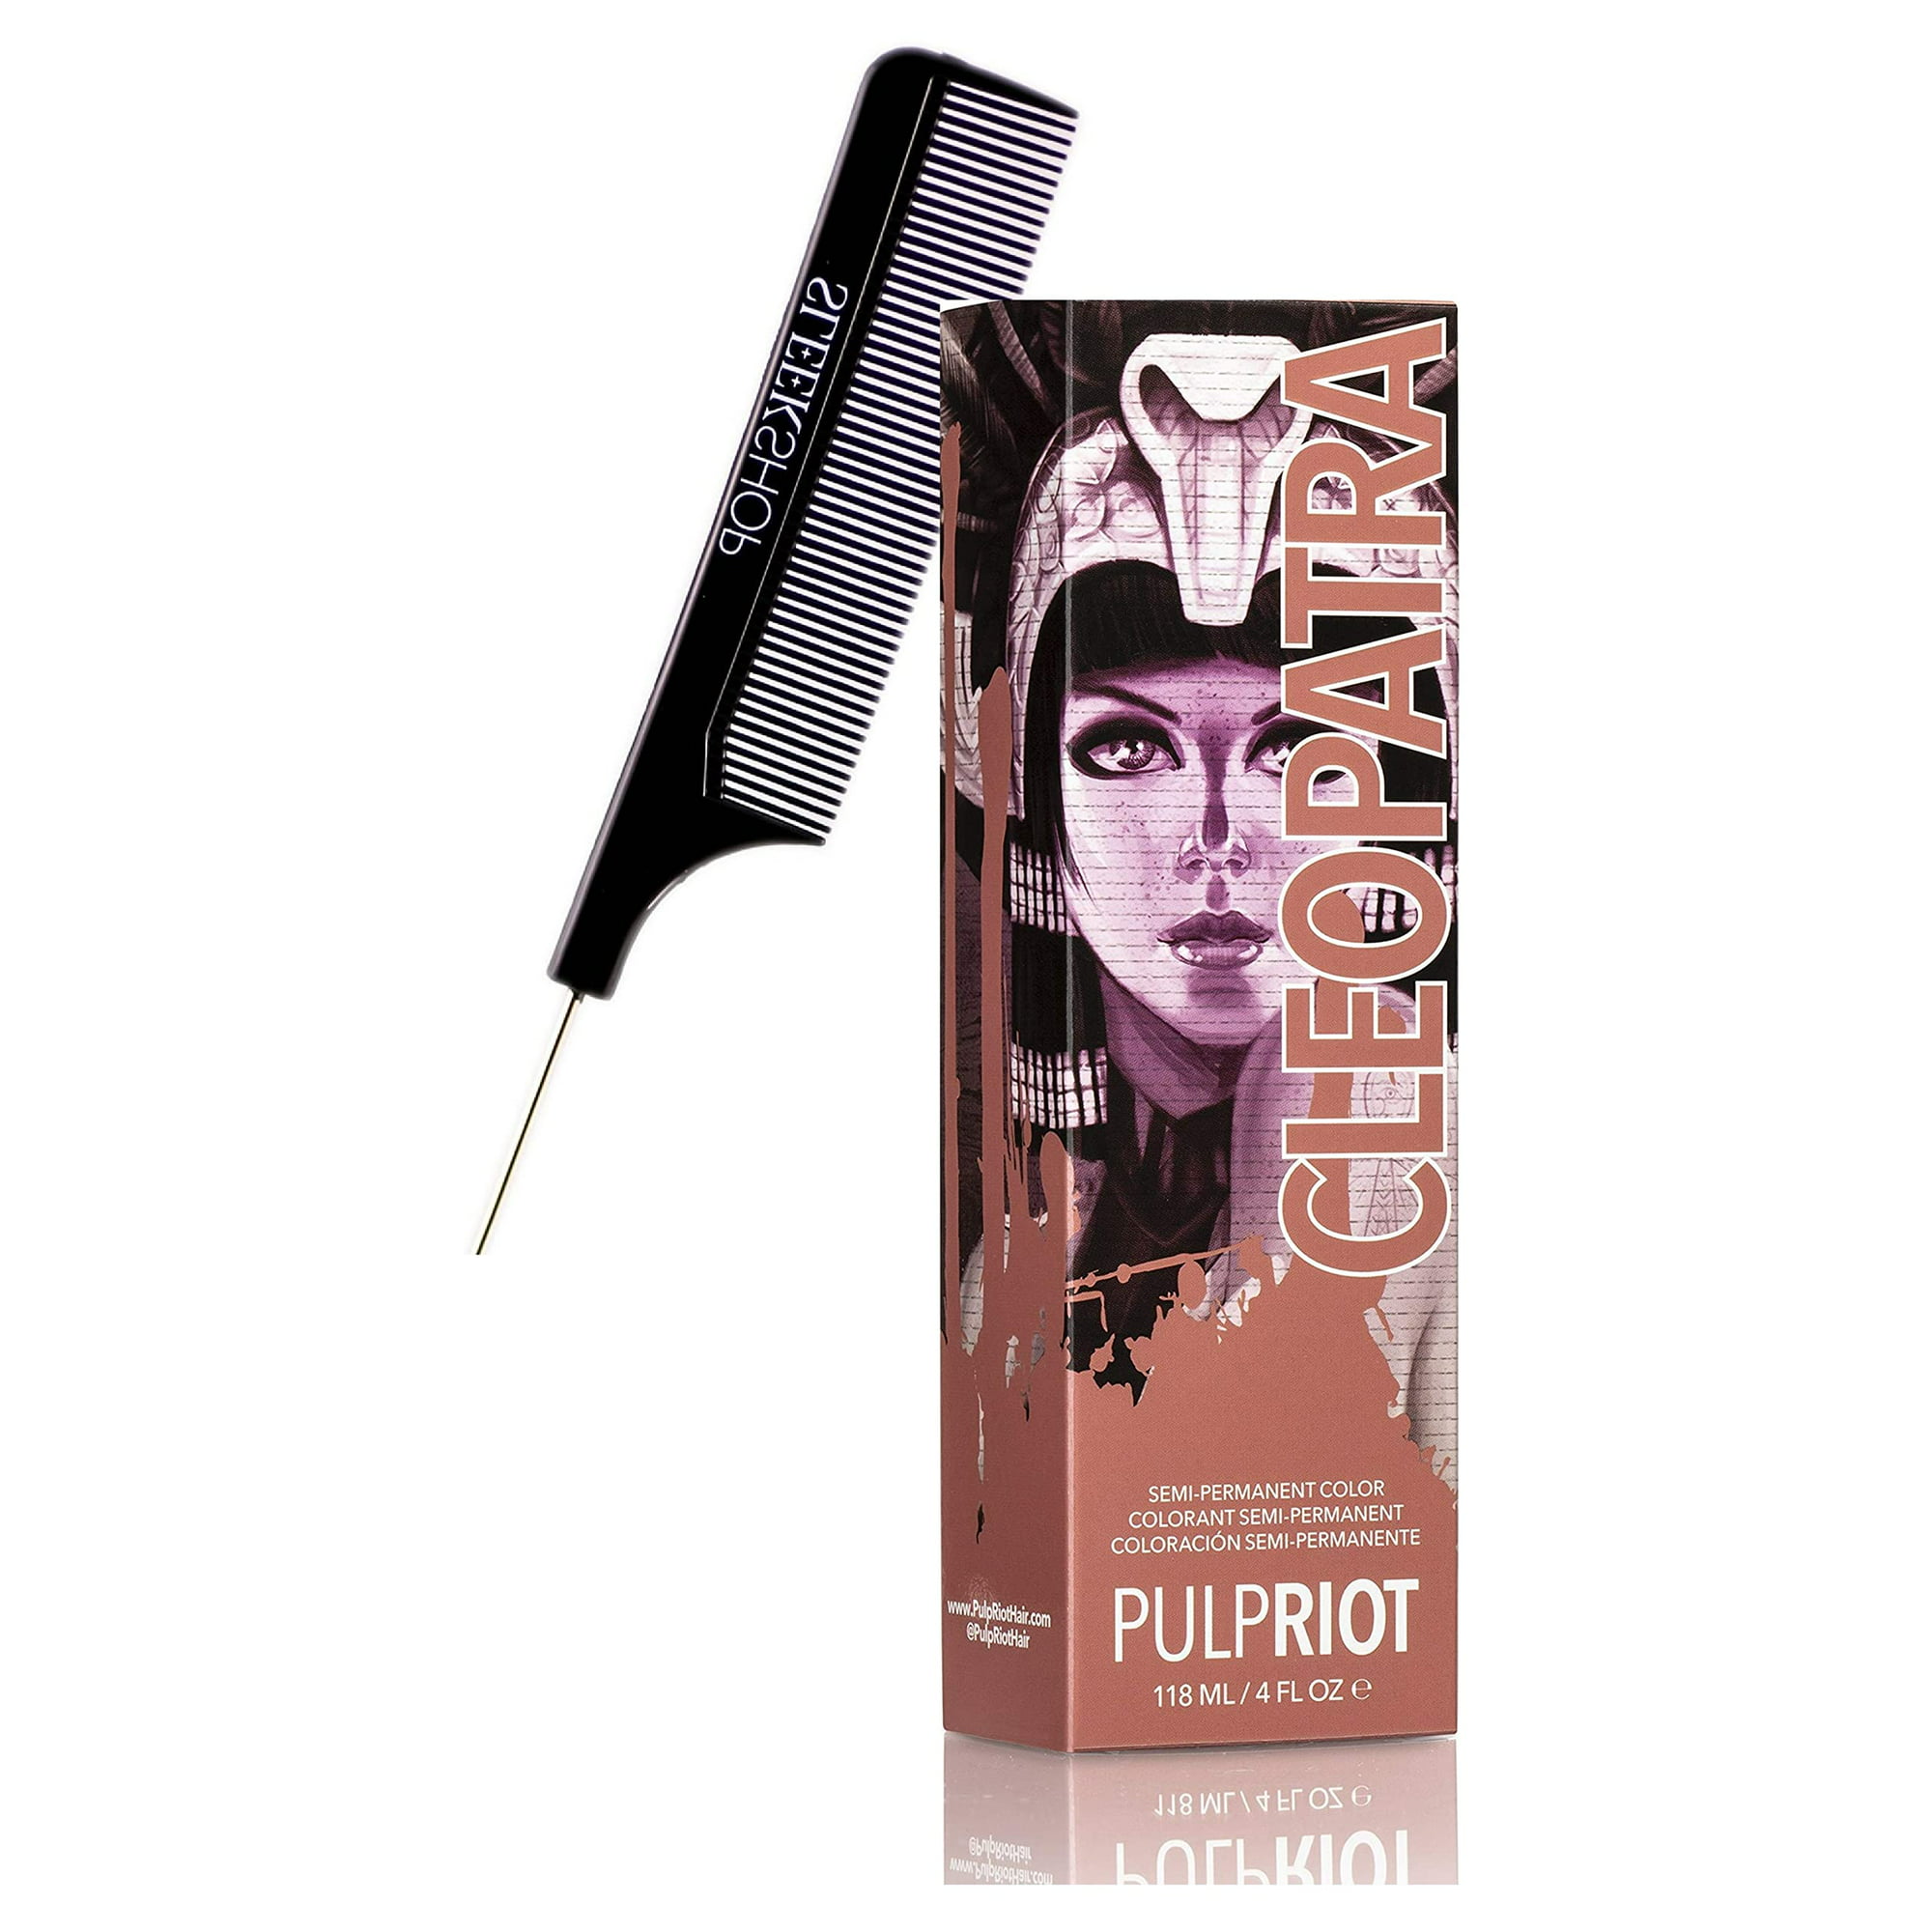 Cleopatra - Peach Rose - 4oz , PulpRiot Pulp Riot SEMI-PERMANENT Direct Dye  Hair Color, Deposit Only, Ammonia-Free, Peroxide-Free Haircolor Dye - Pack  of 3 w/ SLEEK Pin Comb | Walmart Canada